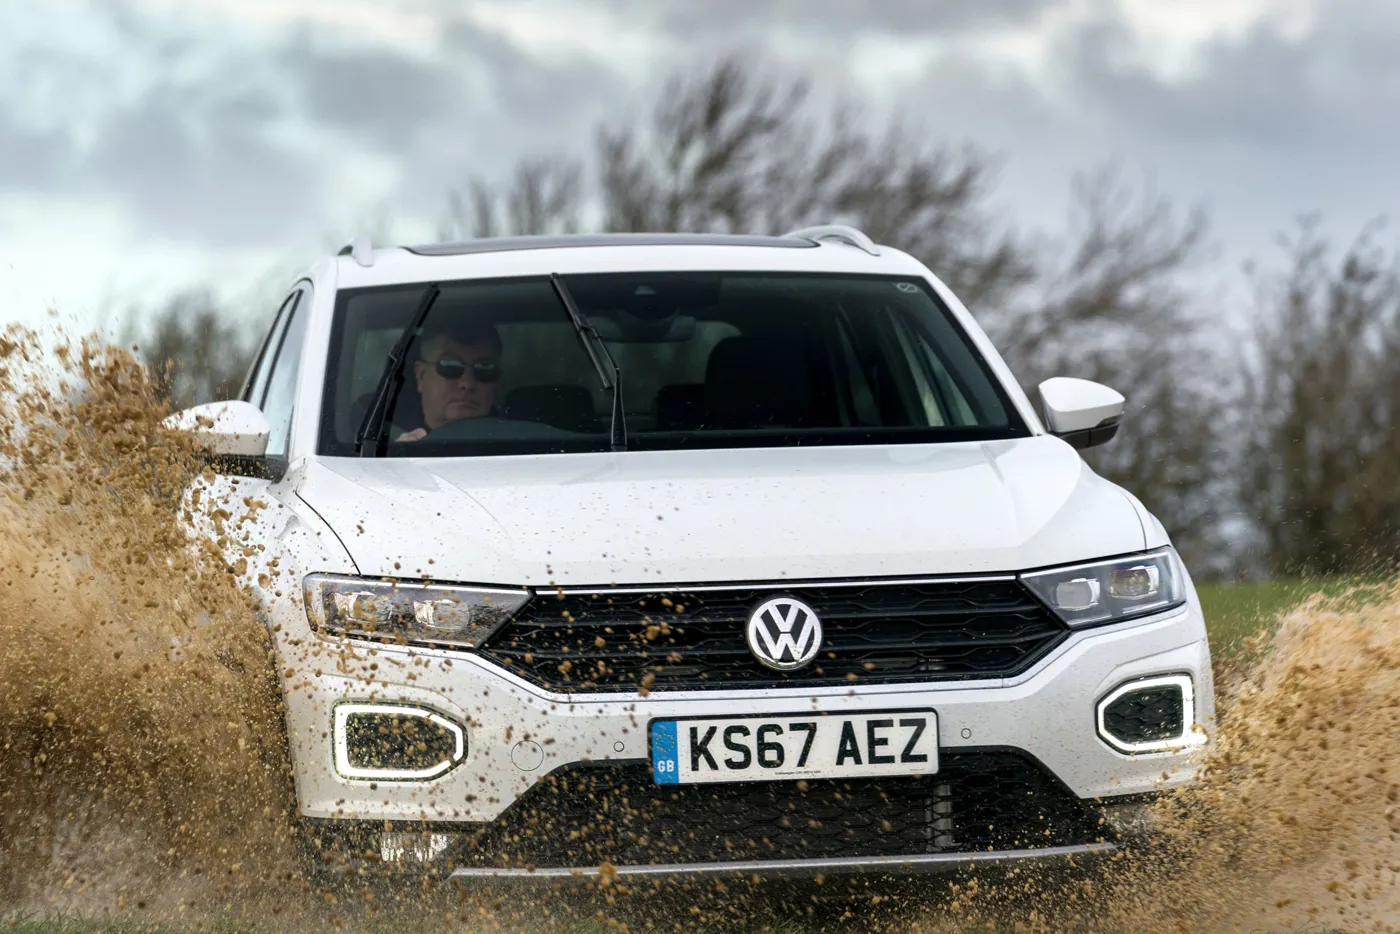 VW T-Roc 1.0 TSI is fun to drive and cheap to operate